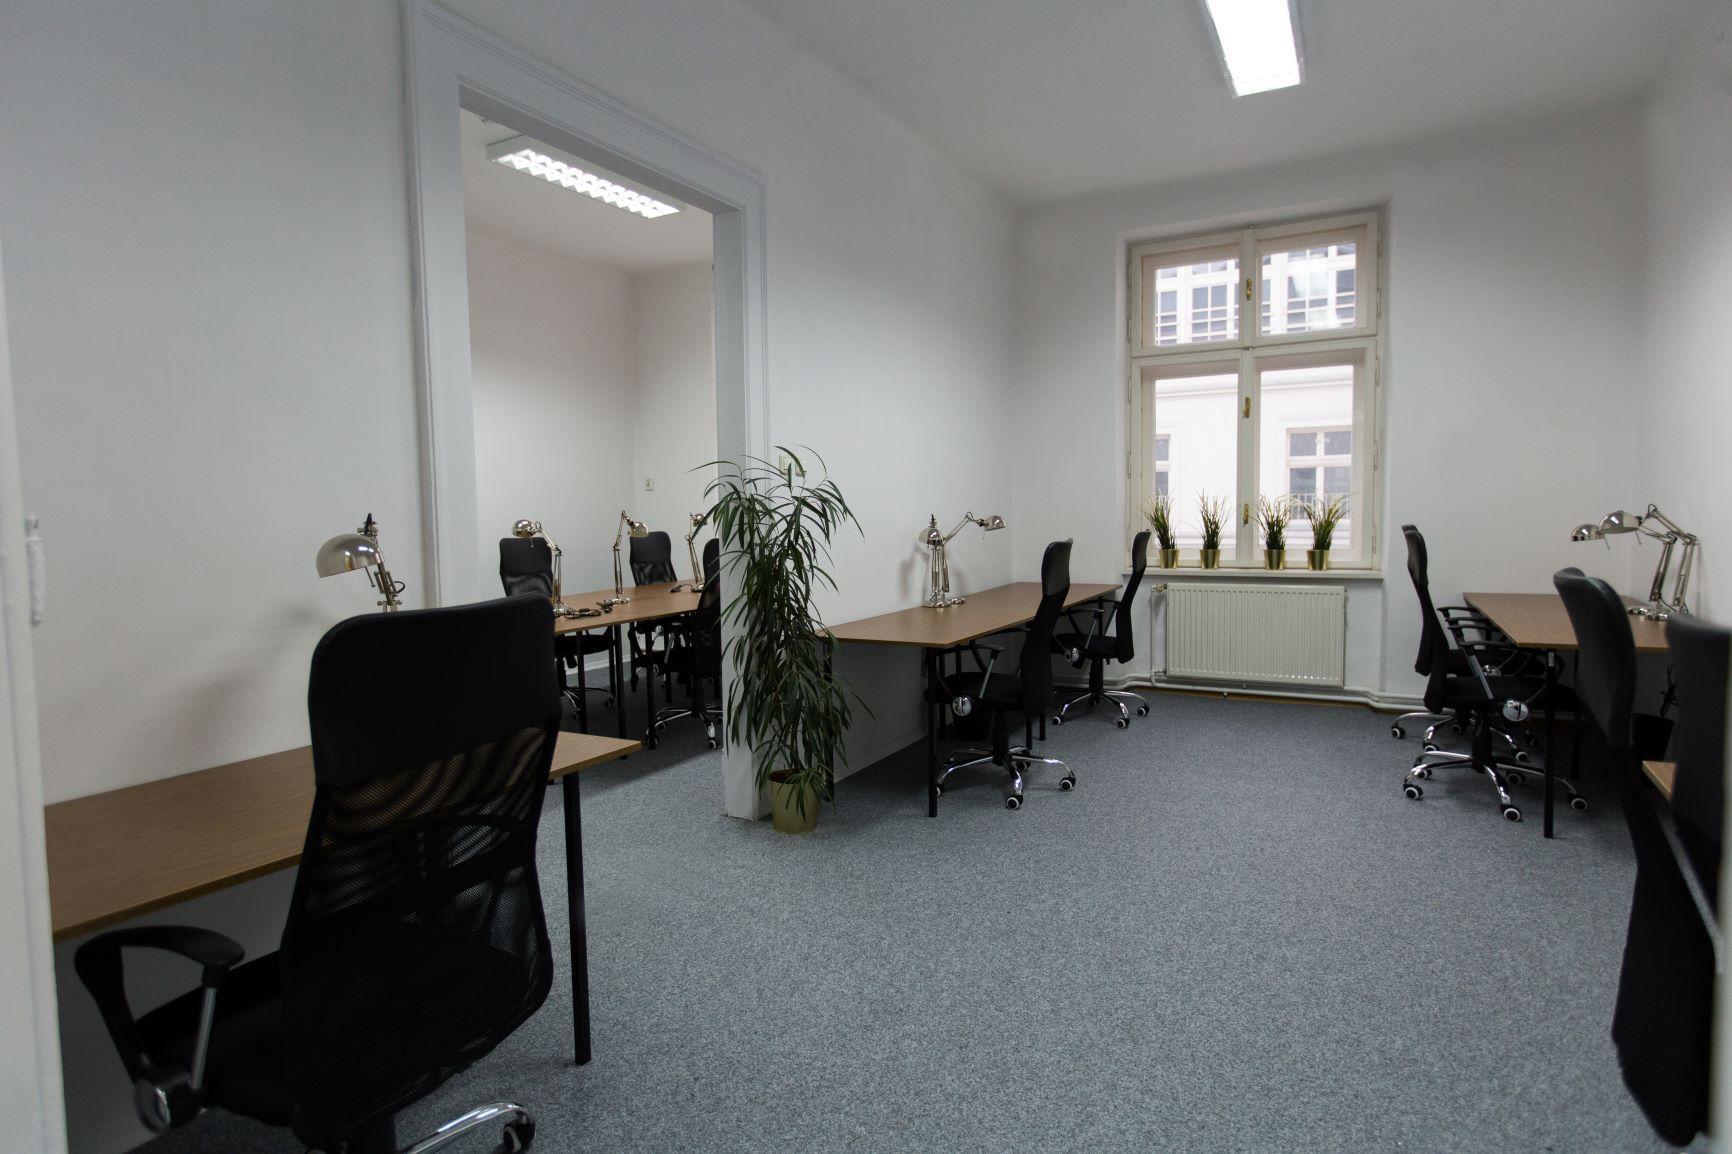 Office for 6 pers. in Krakowski Coworking